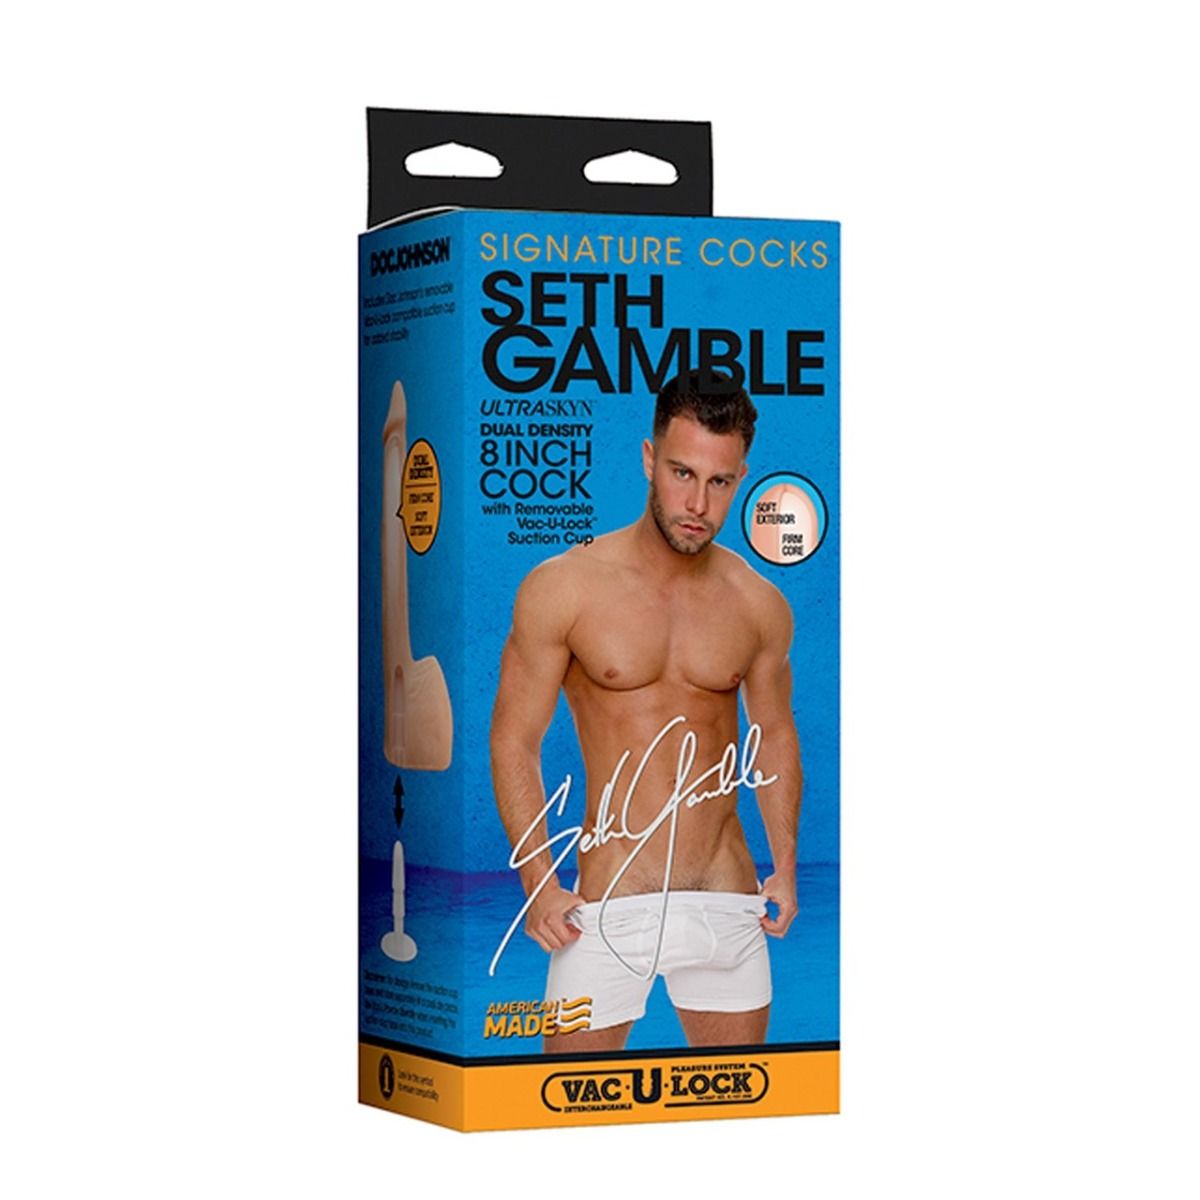 Signature Cocks Seth Gamble Cock UltraSkyn 10 inch Dildo with Removable Vac-U-Lock Suction Cup (8145806196975)